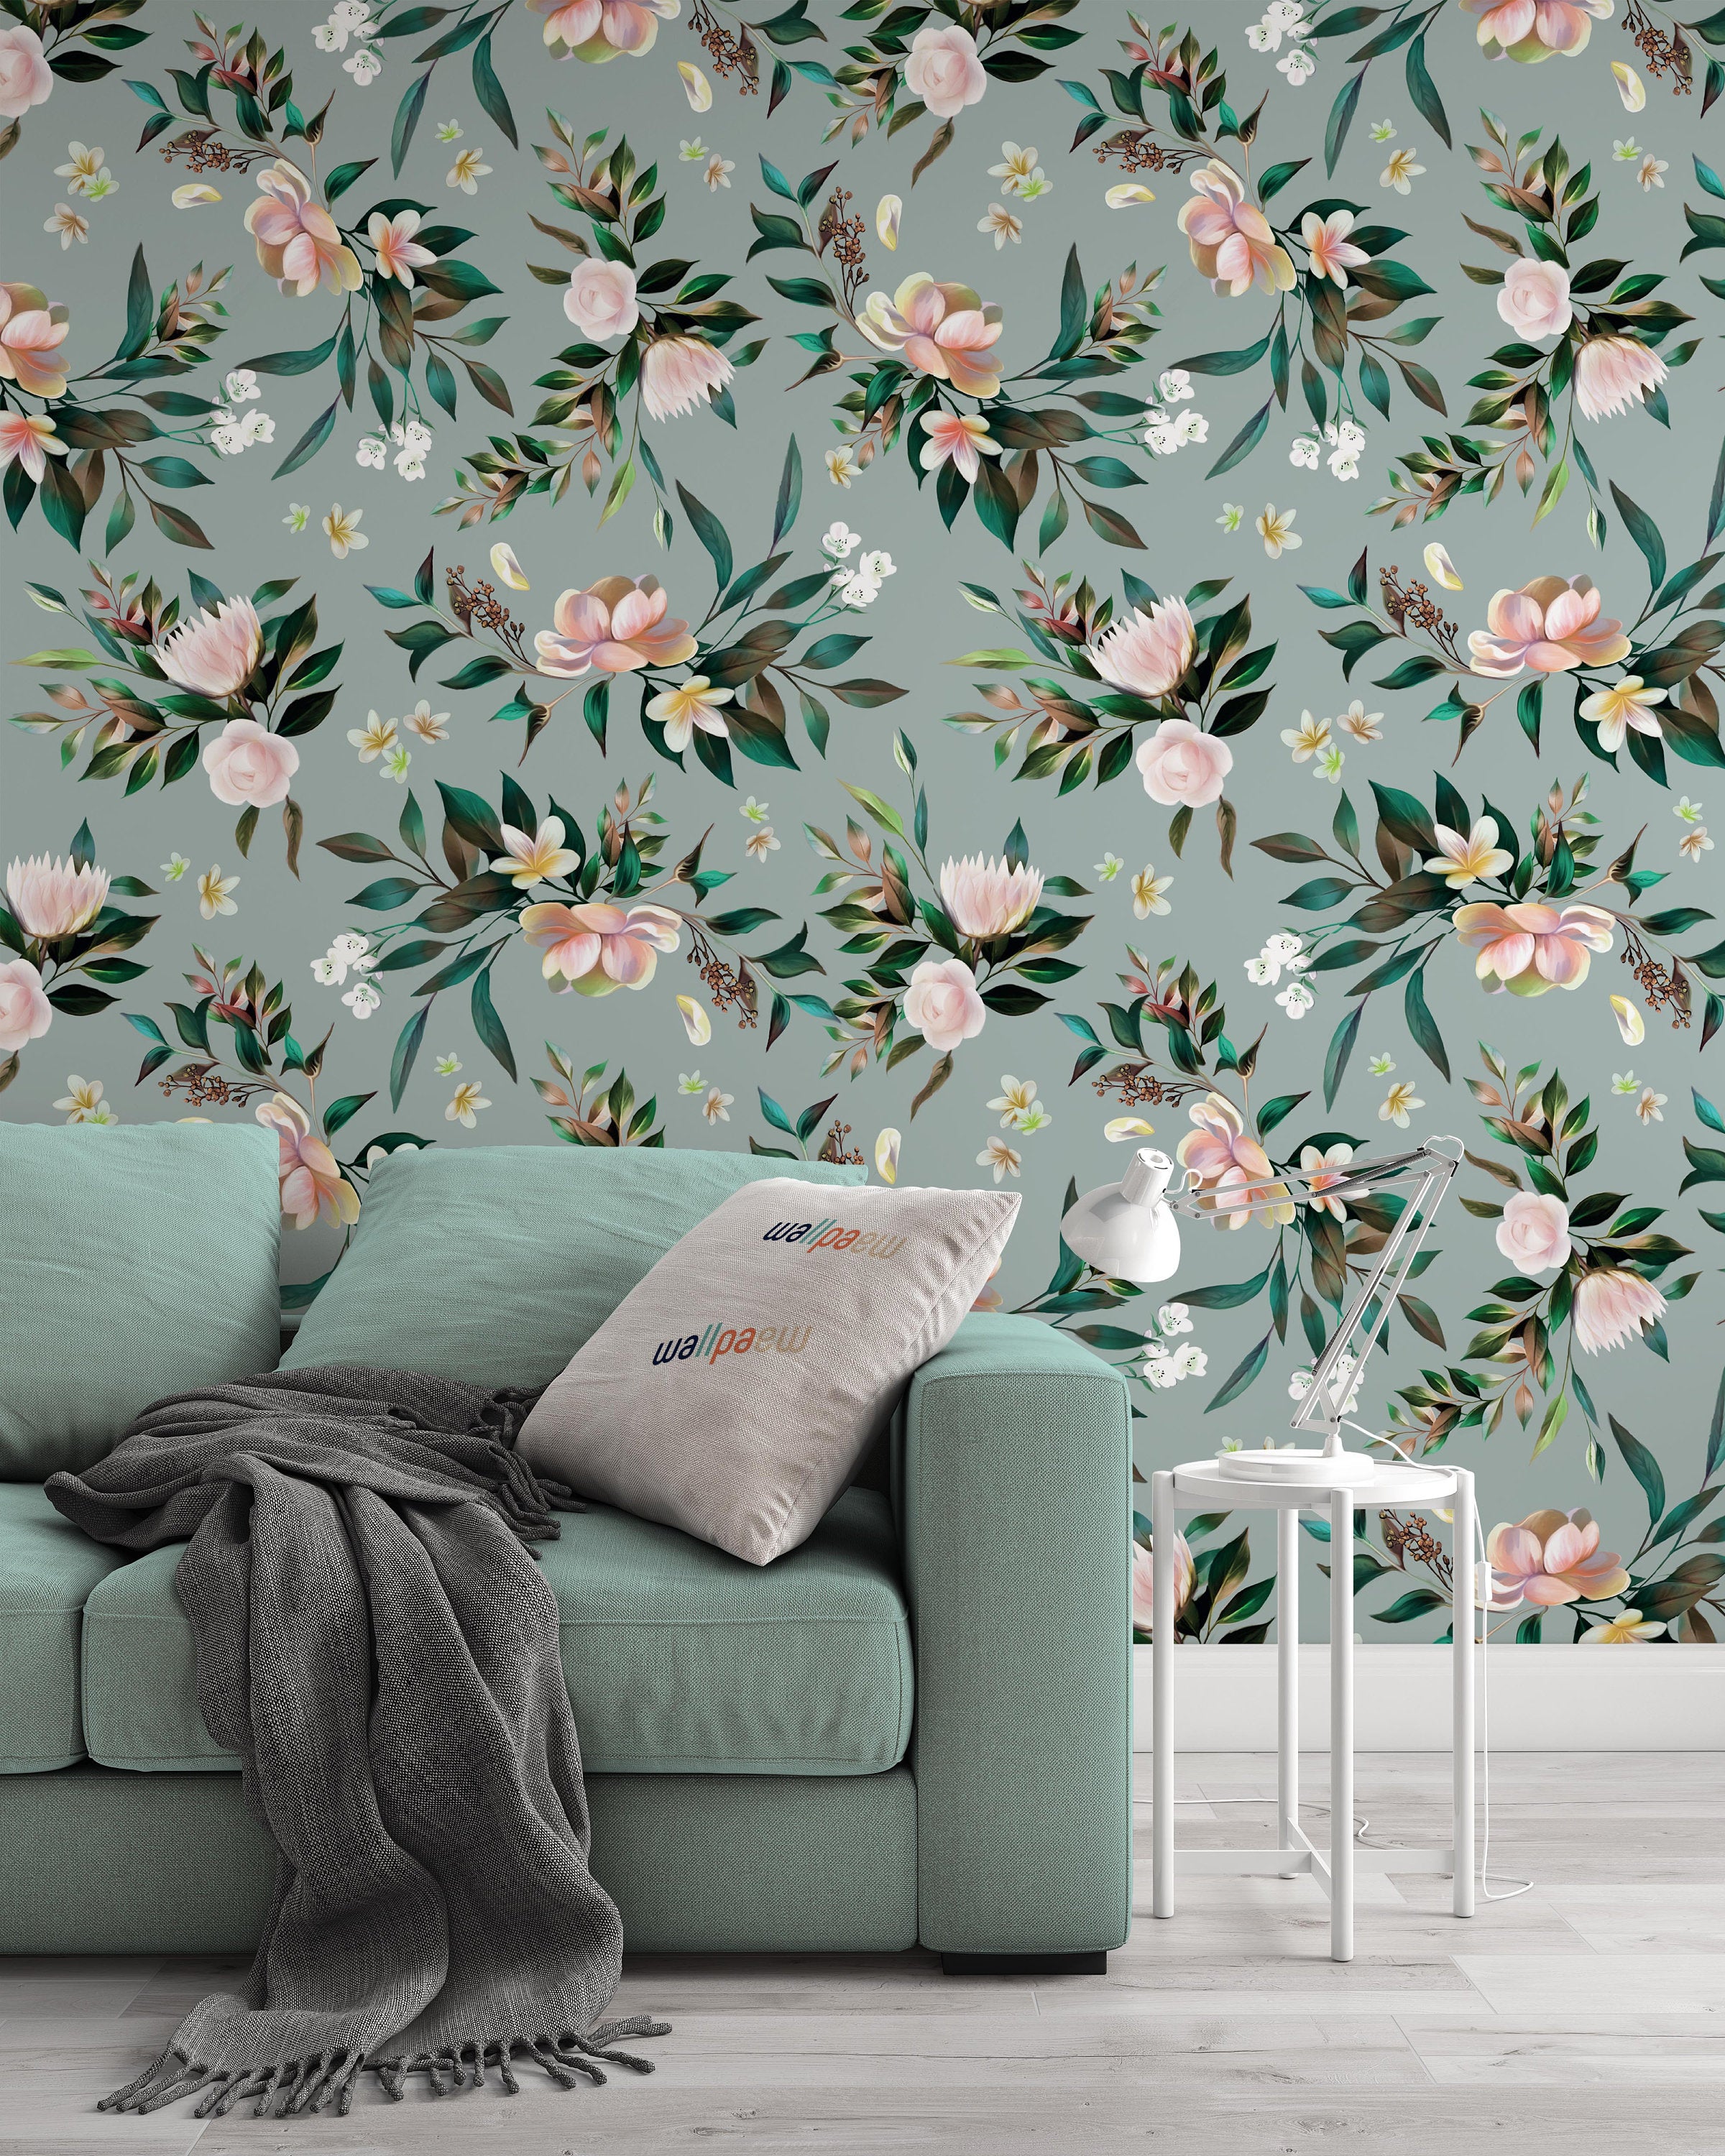 Fresh Floral Pattern with Braided Leaves Flowers Wallpaper